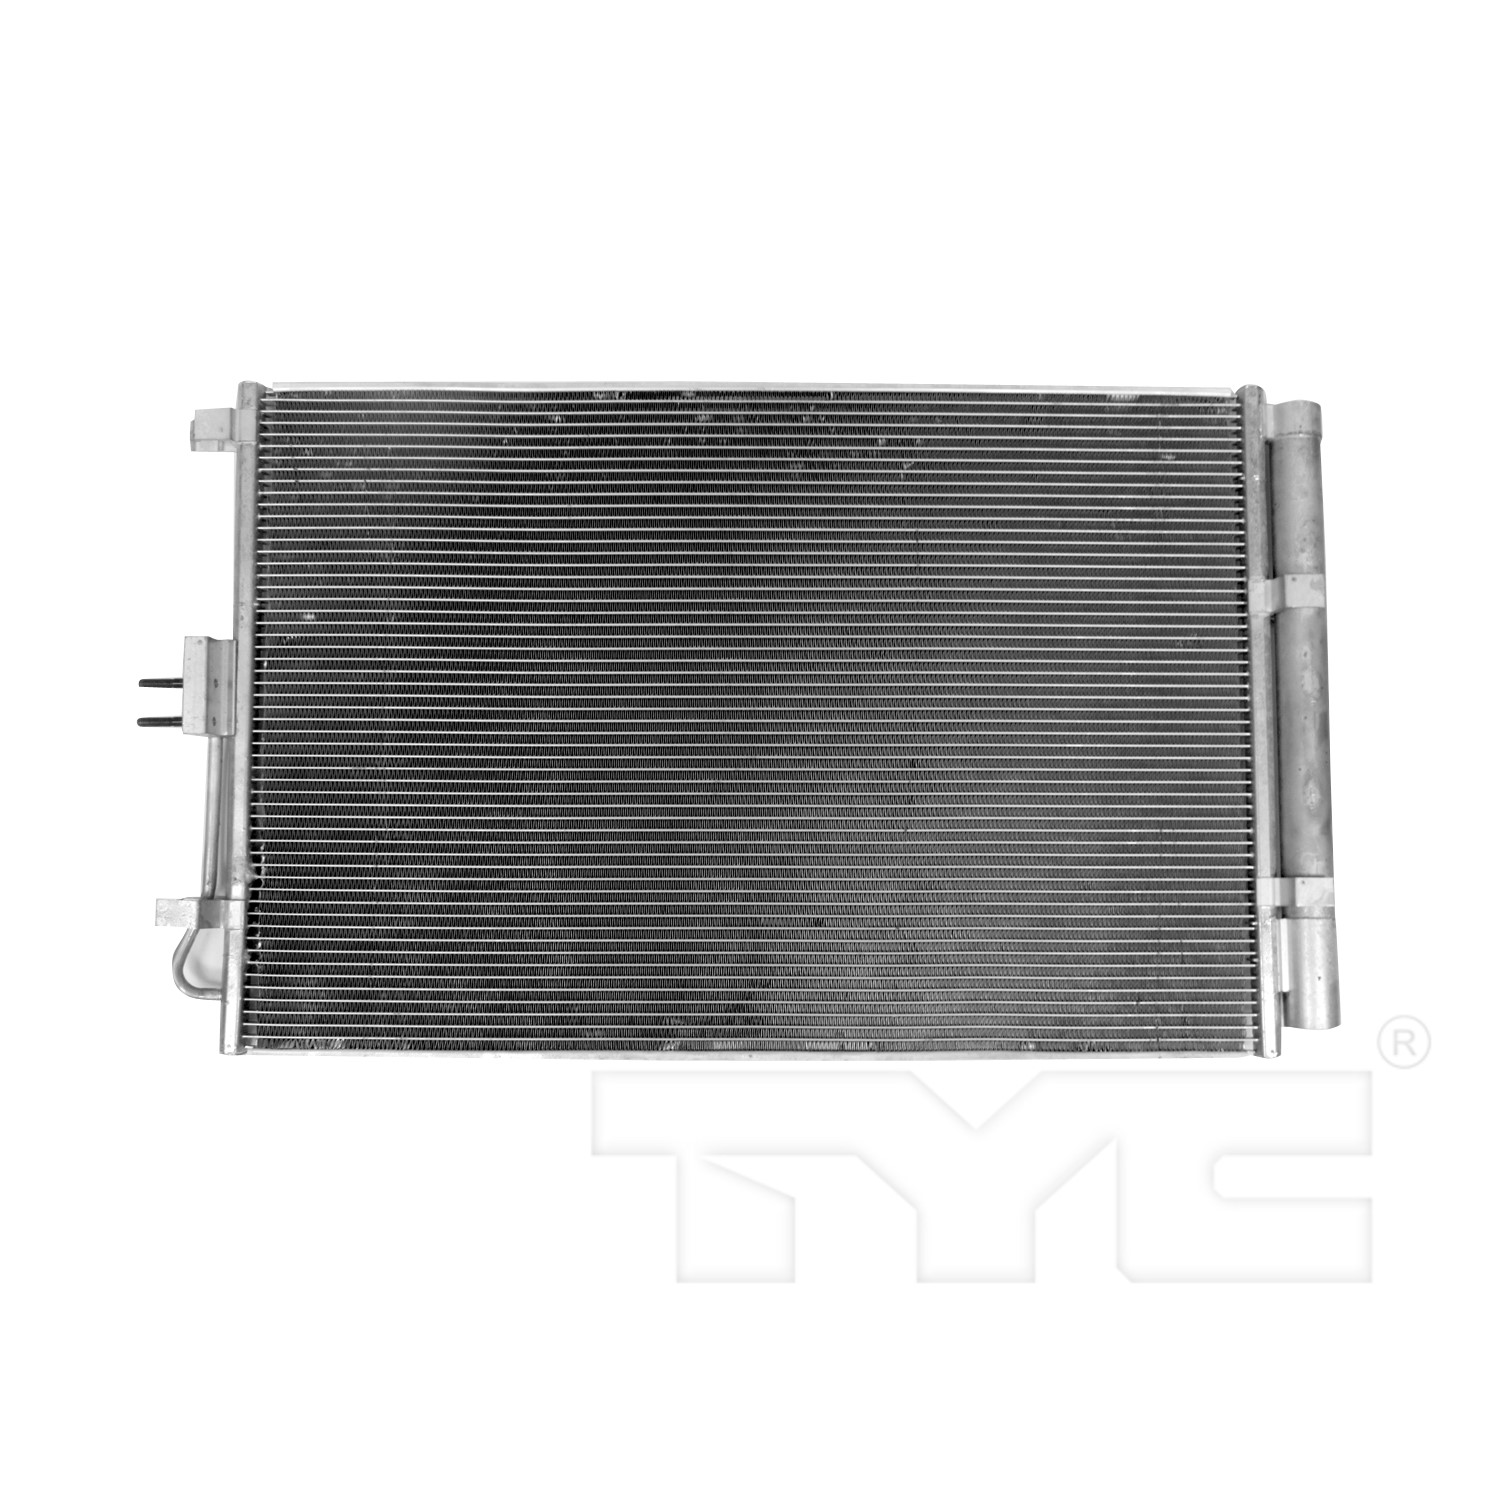 Aftermarket AC CONDENSERS for KIA - SOUL, SOUL,12-13,Air conditioning condenser